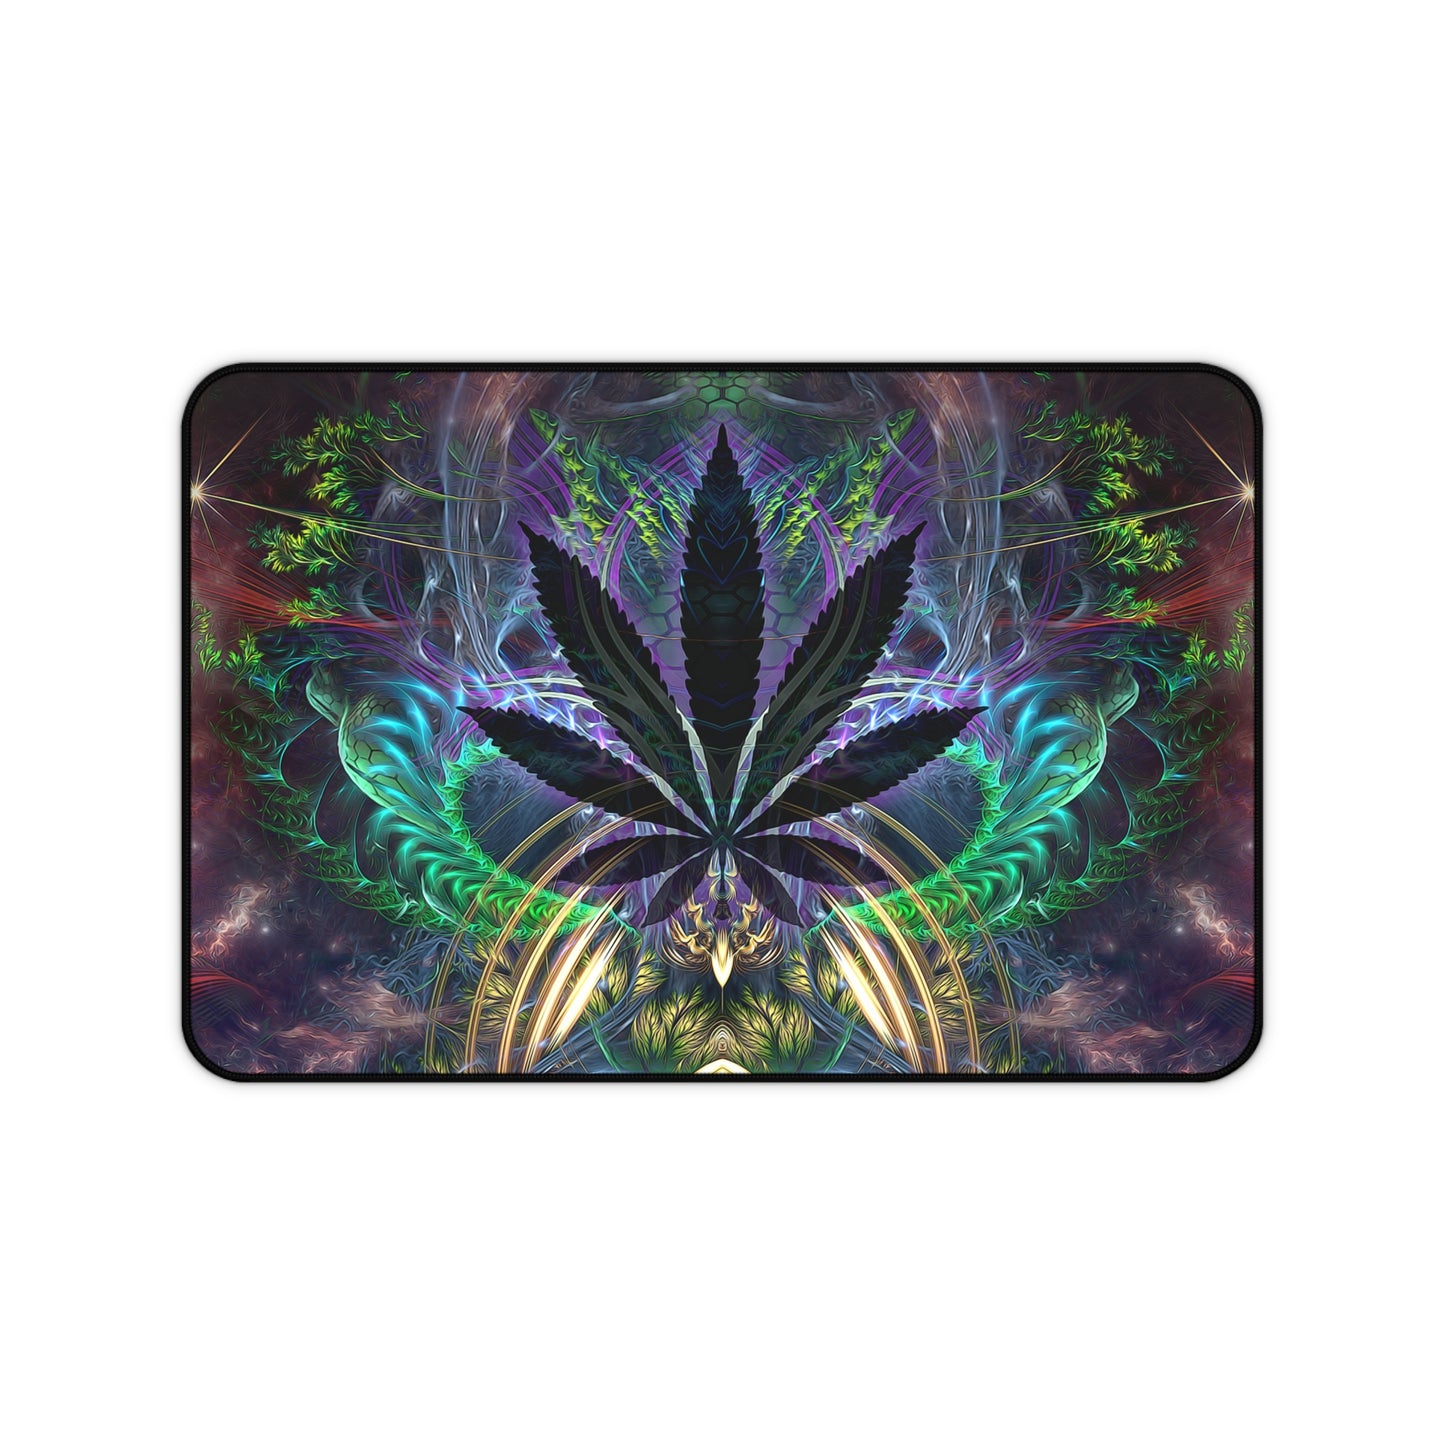 "Heightened Stroll - [Leaf Section]" DESK MAT / MOUSE PAD (12x18)(12x22)(15.5x31)